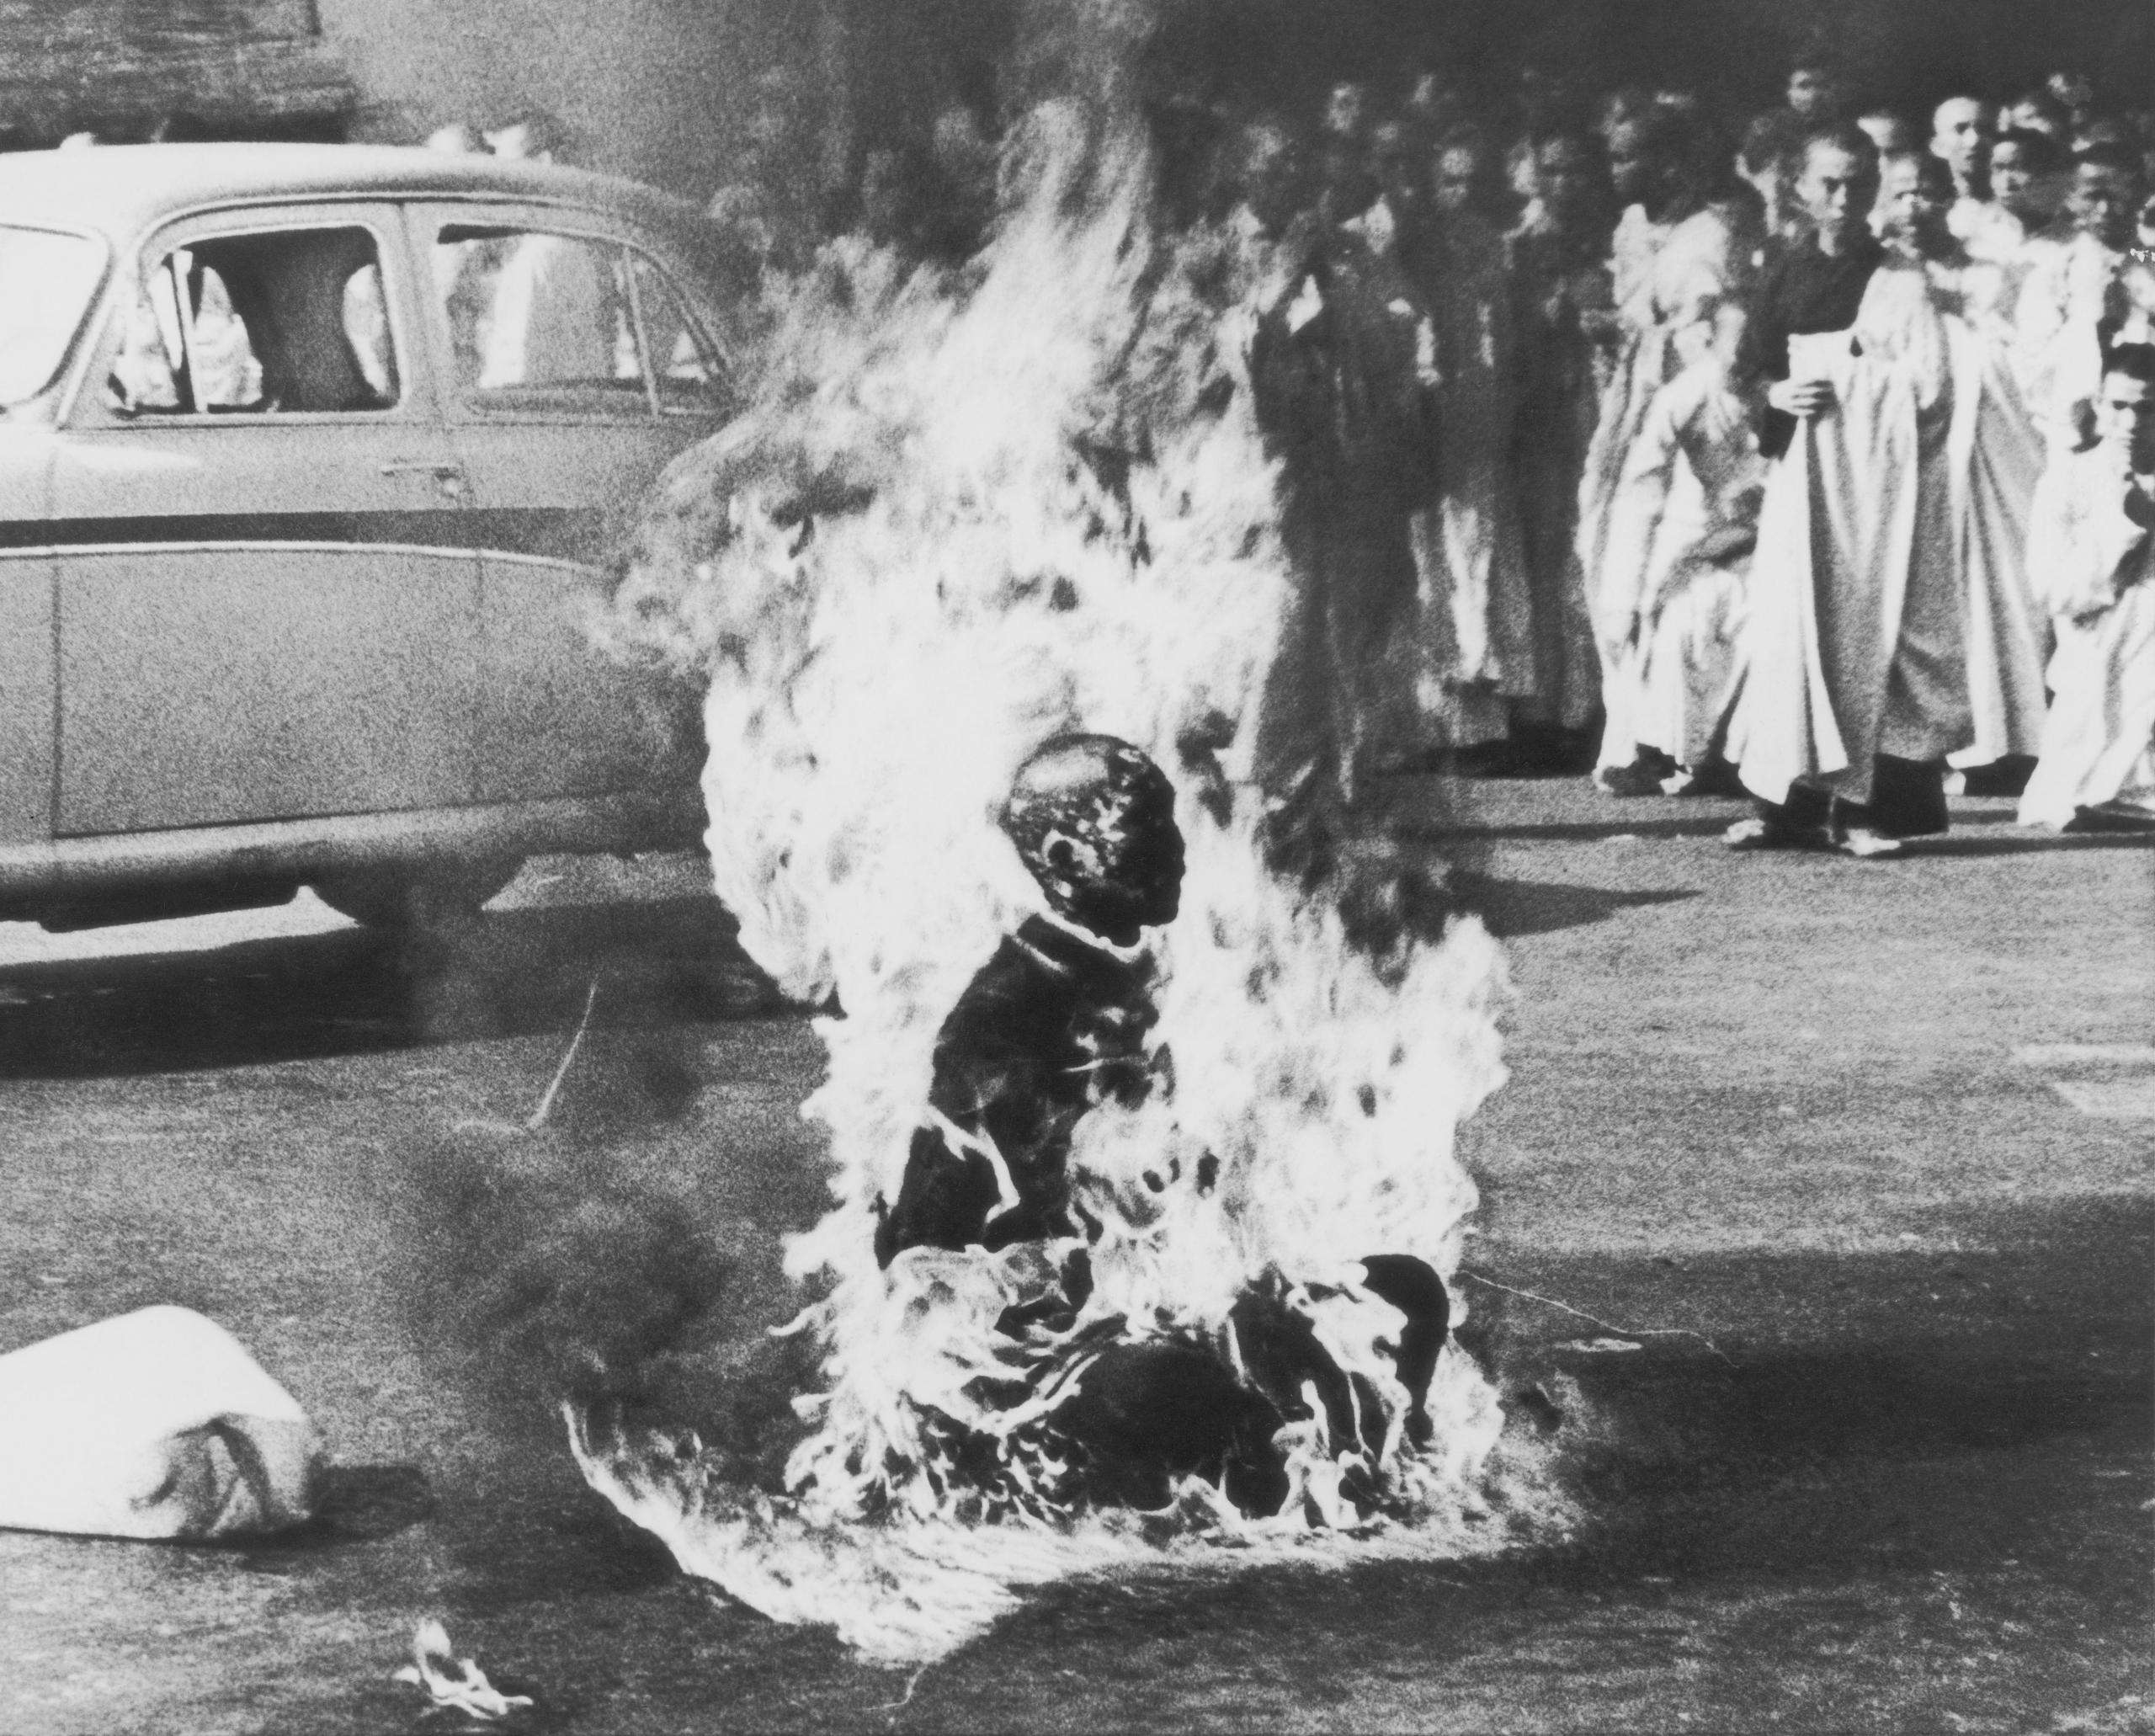 Thich Quang Duc